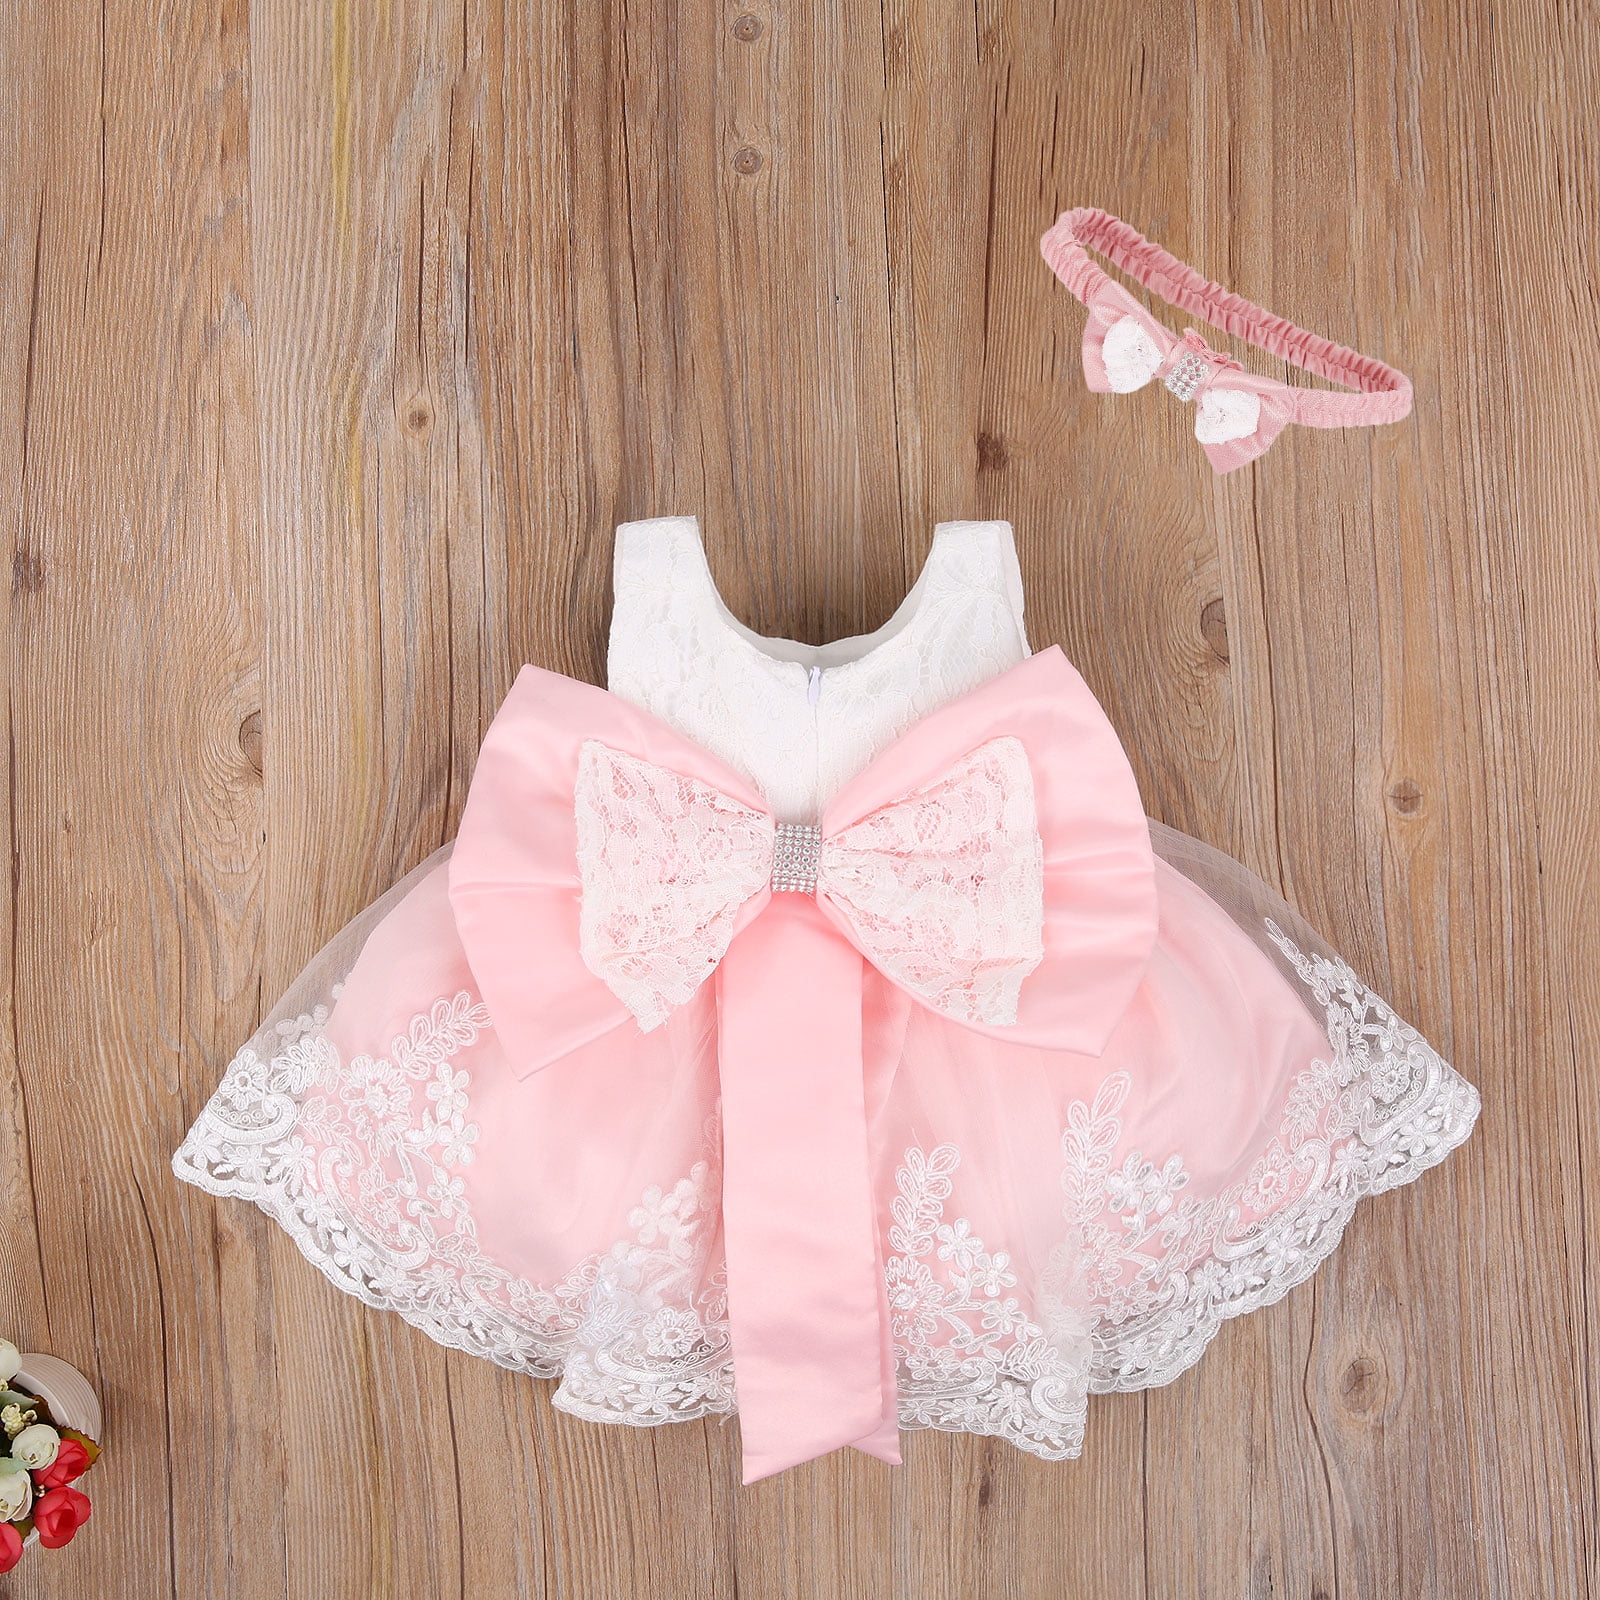 Baby Girl Dresses: Buy Baby Frocks & Dresses Online | Mothercare India